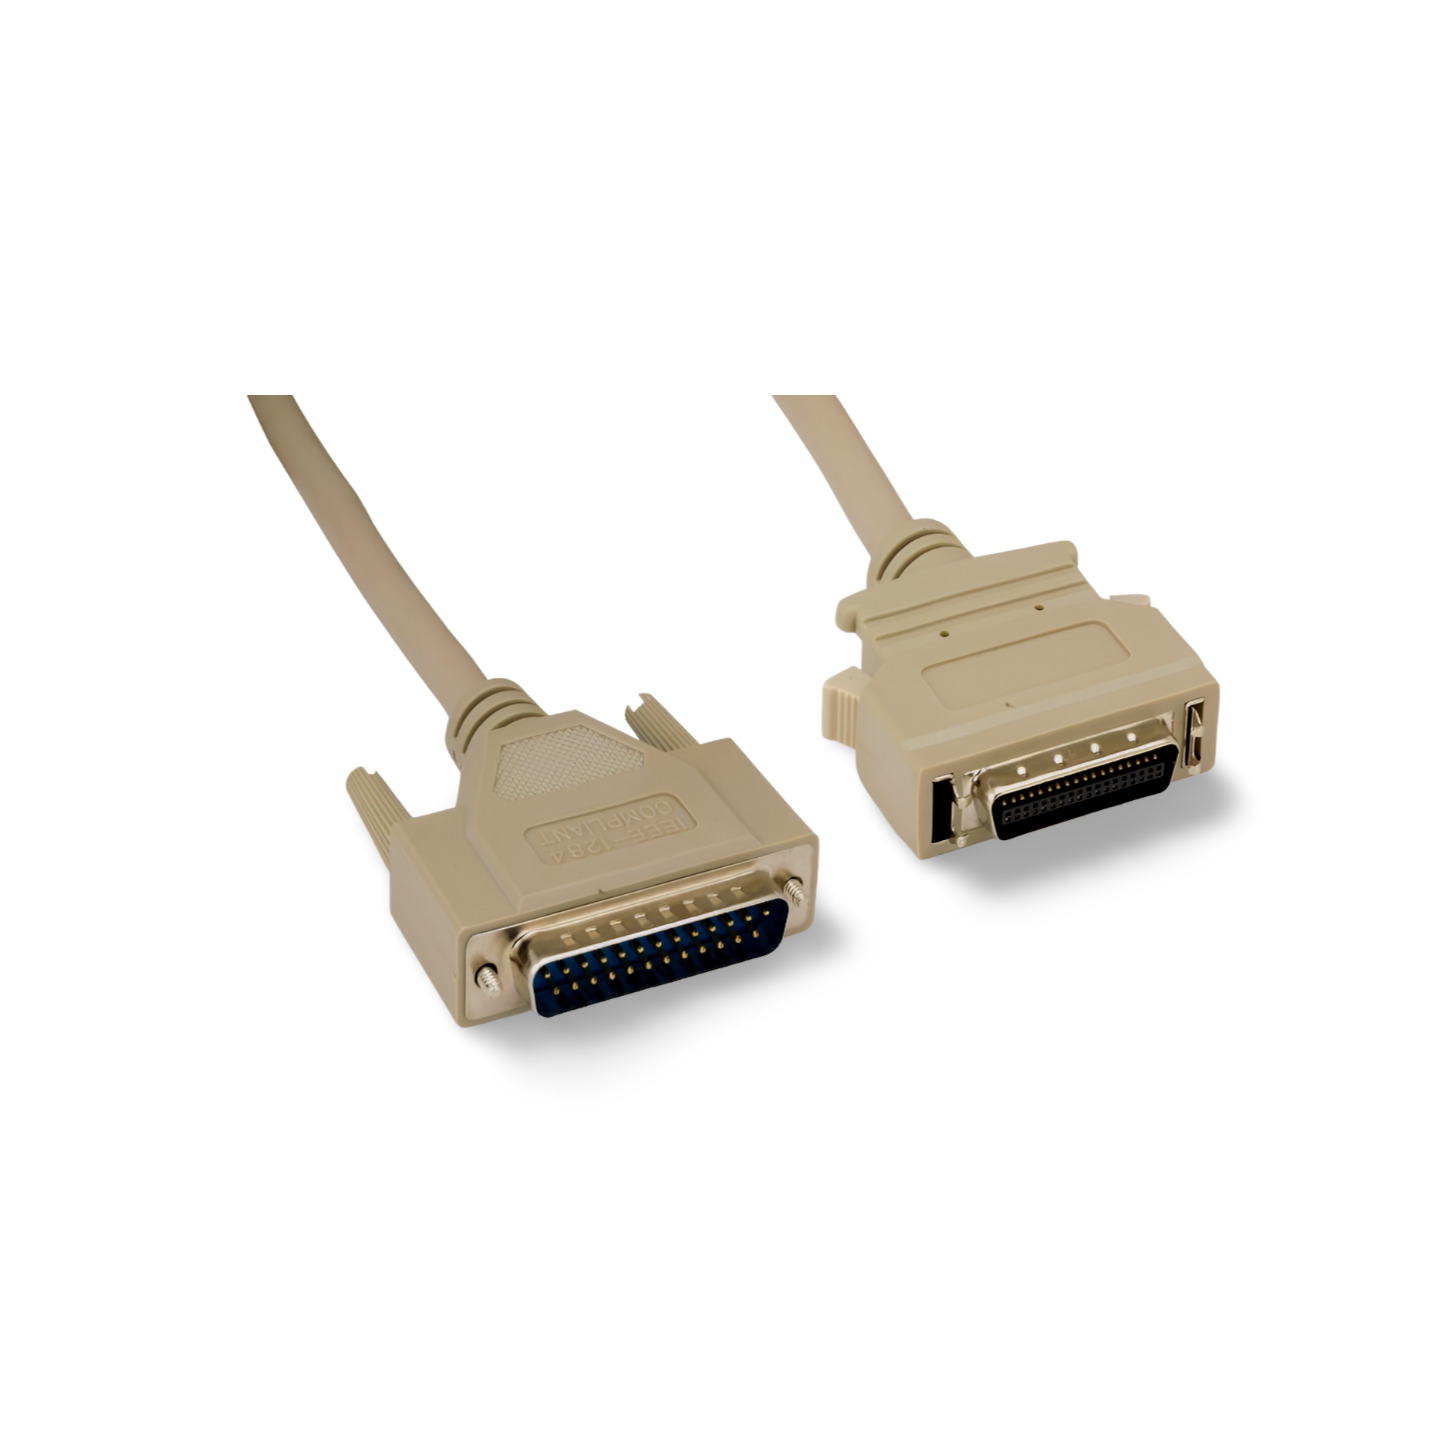 25ft Parallel Printer Cable IEEE-1284 A-C DB25 Male to HPCN36 Male - Beige